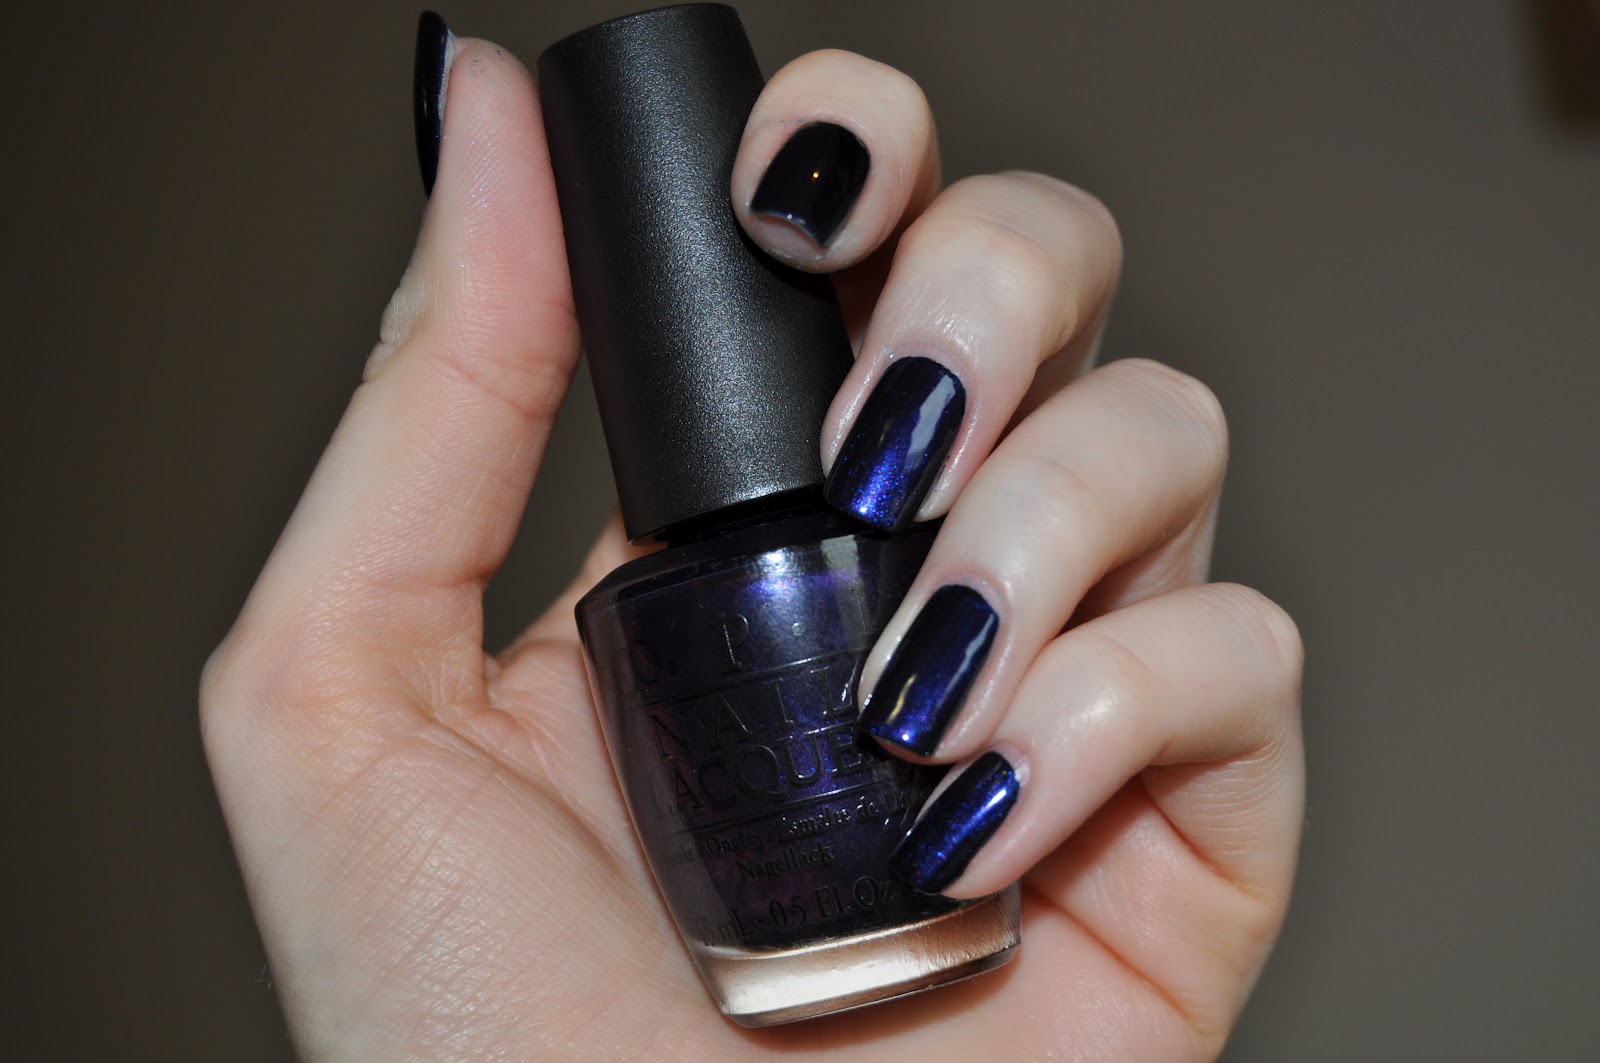 9. OPI Russian Navy - wide 6